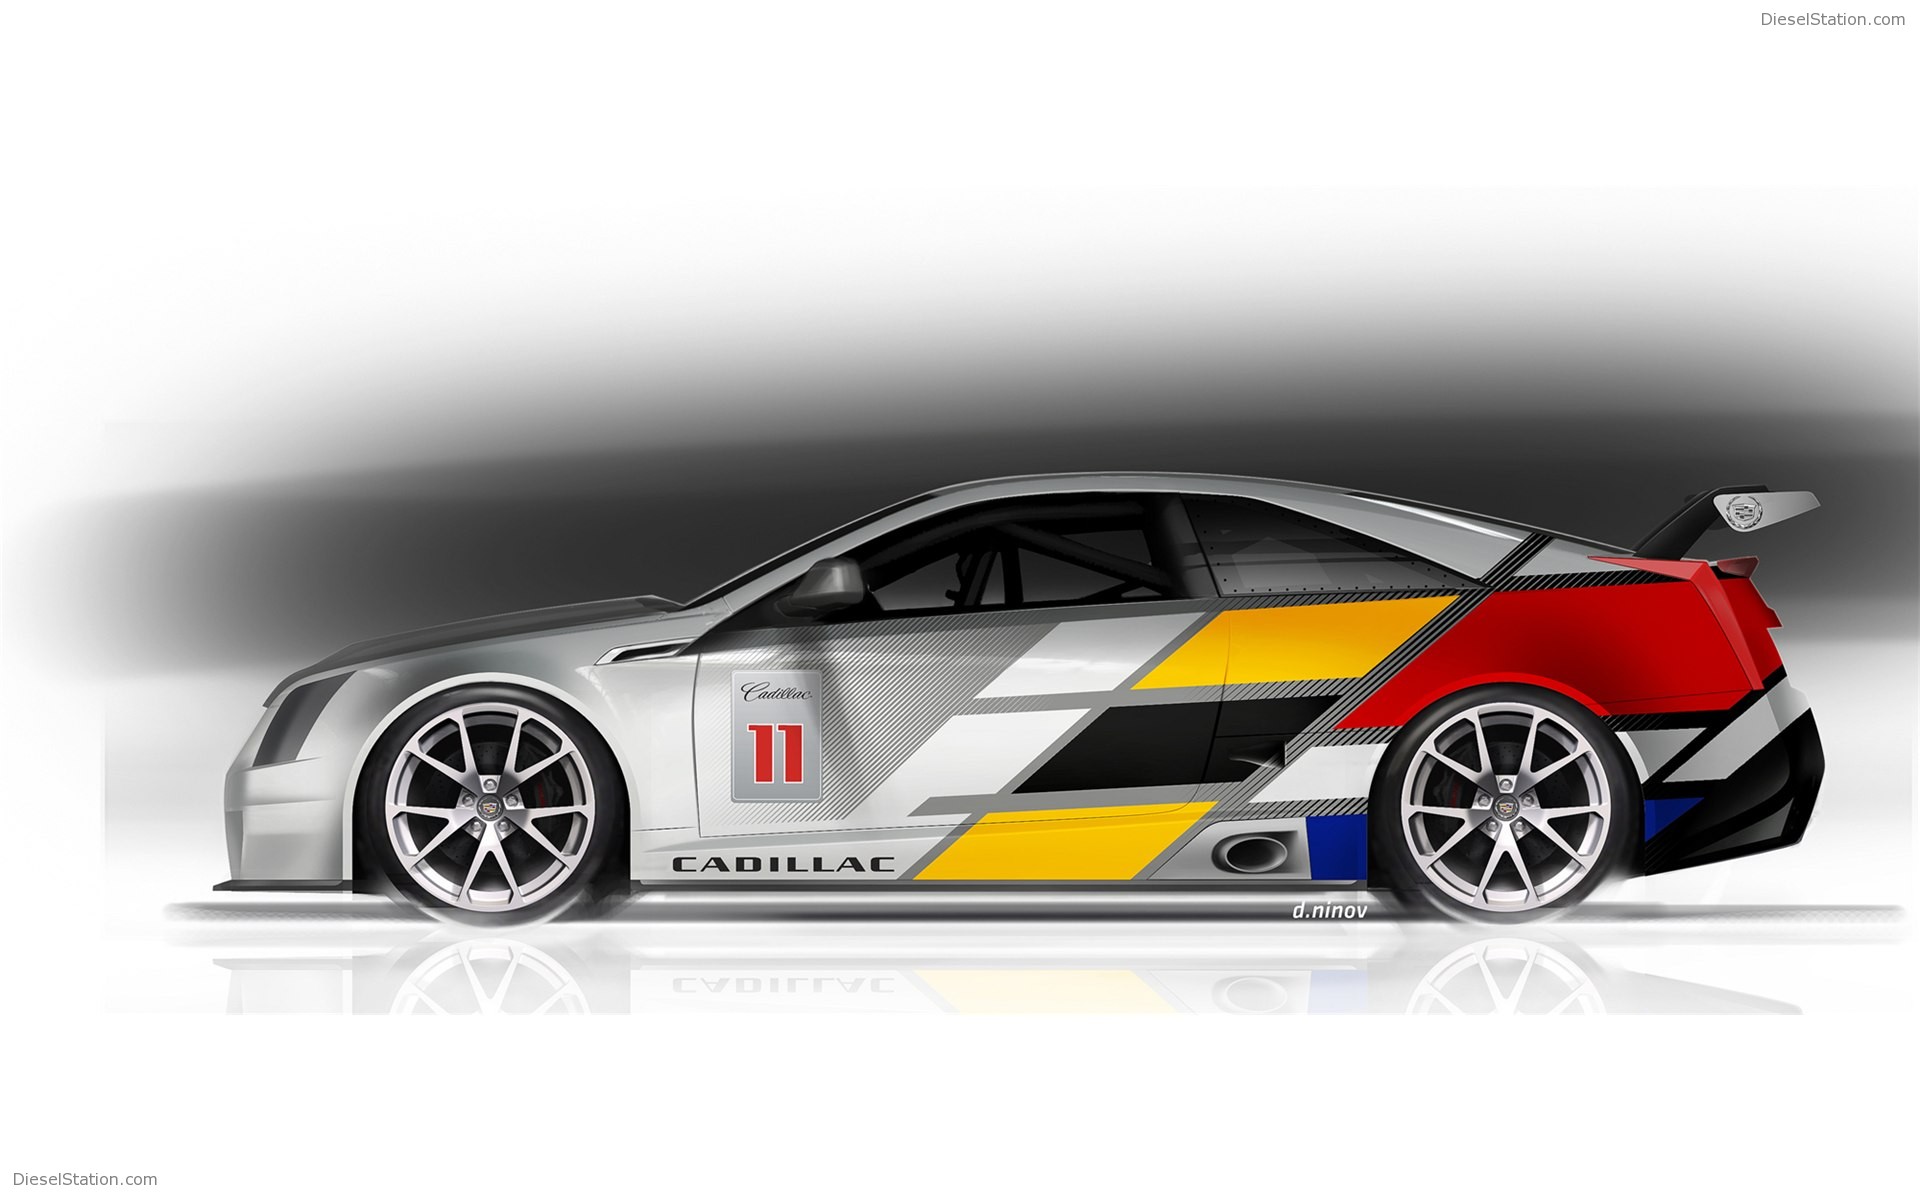 Cadillac CTS V Coupe Race Car Widescreen Exotic Car Picture #01 of ...